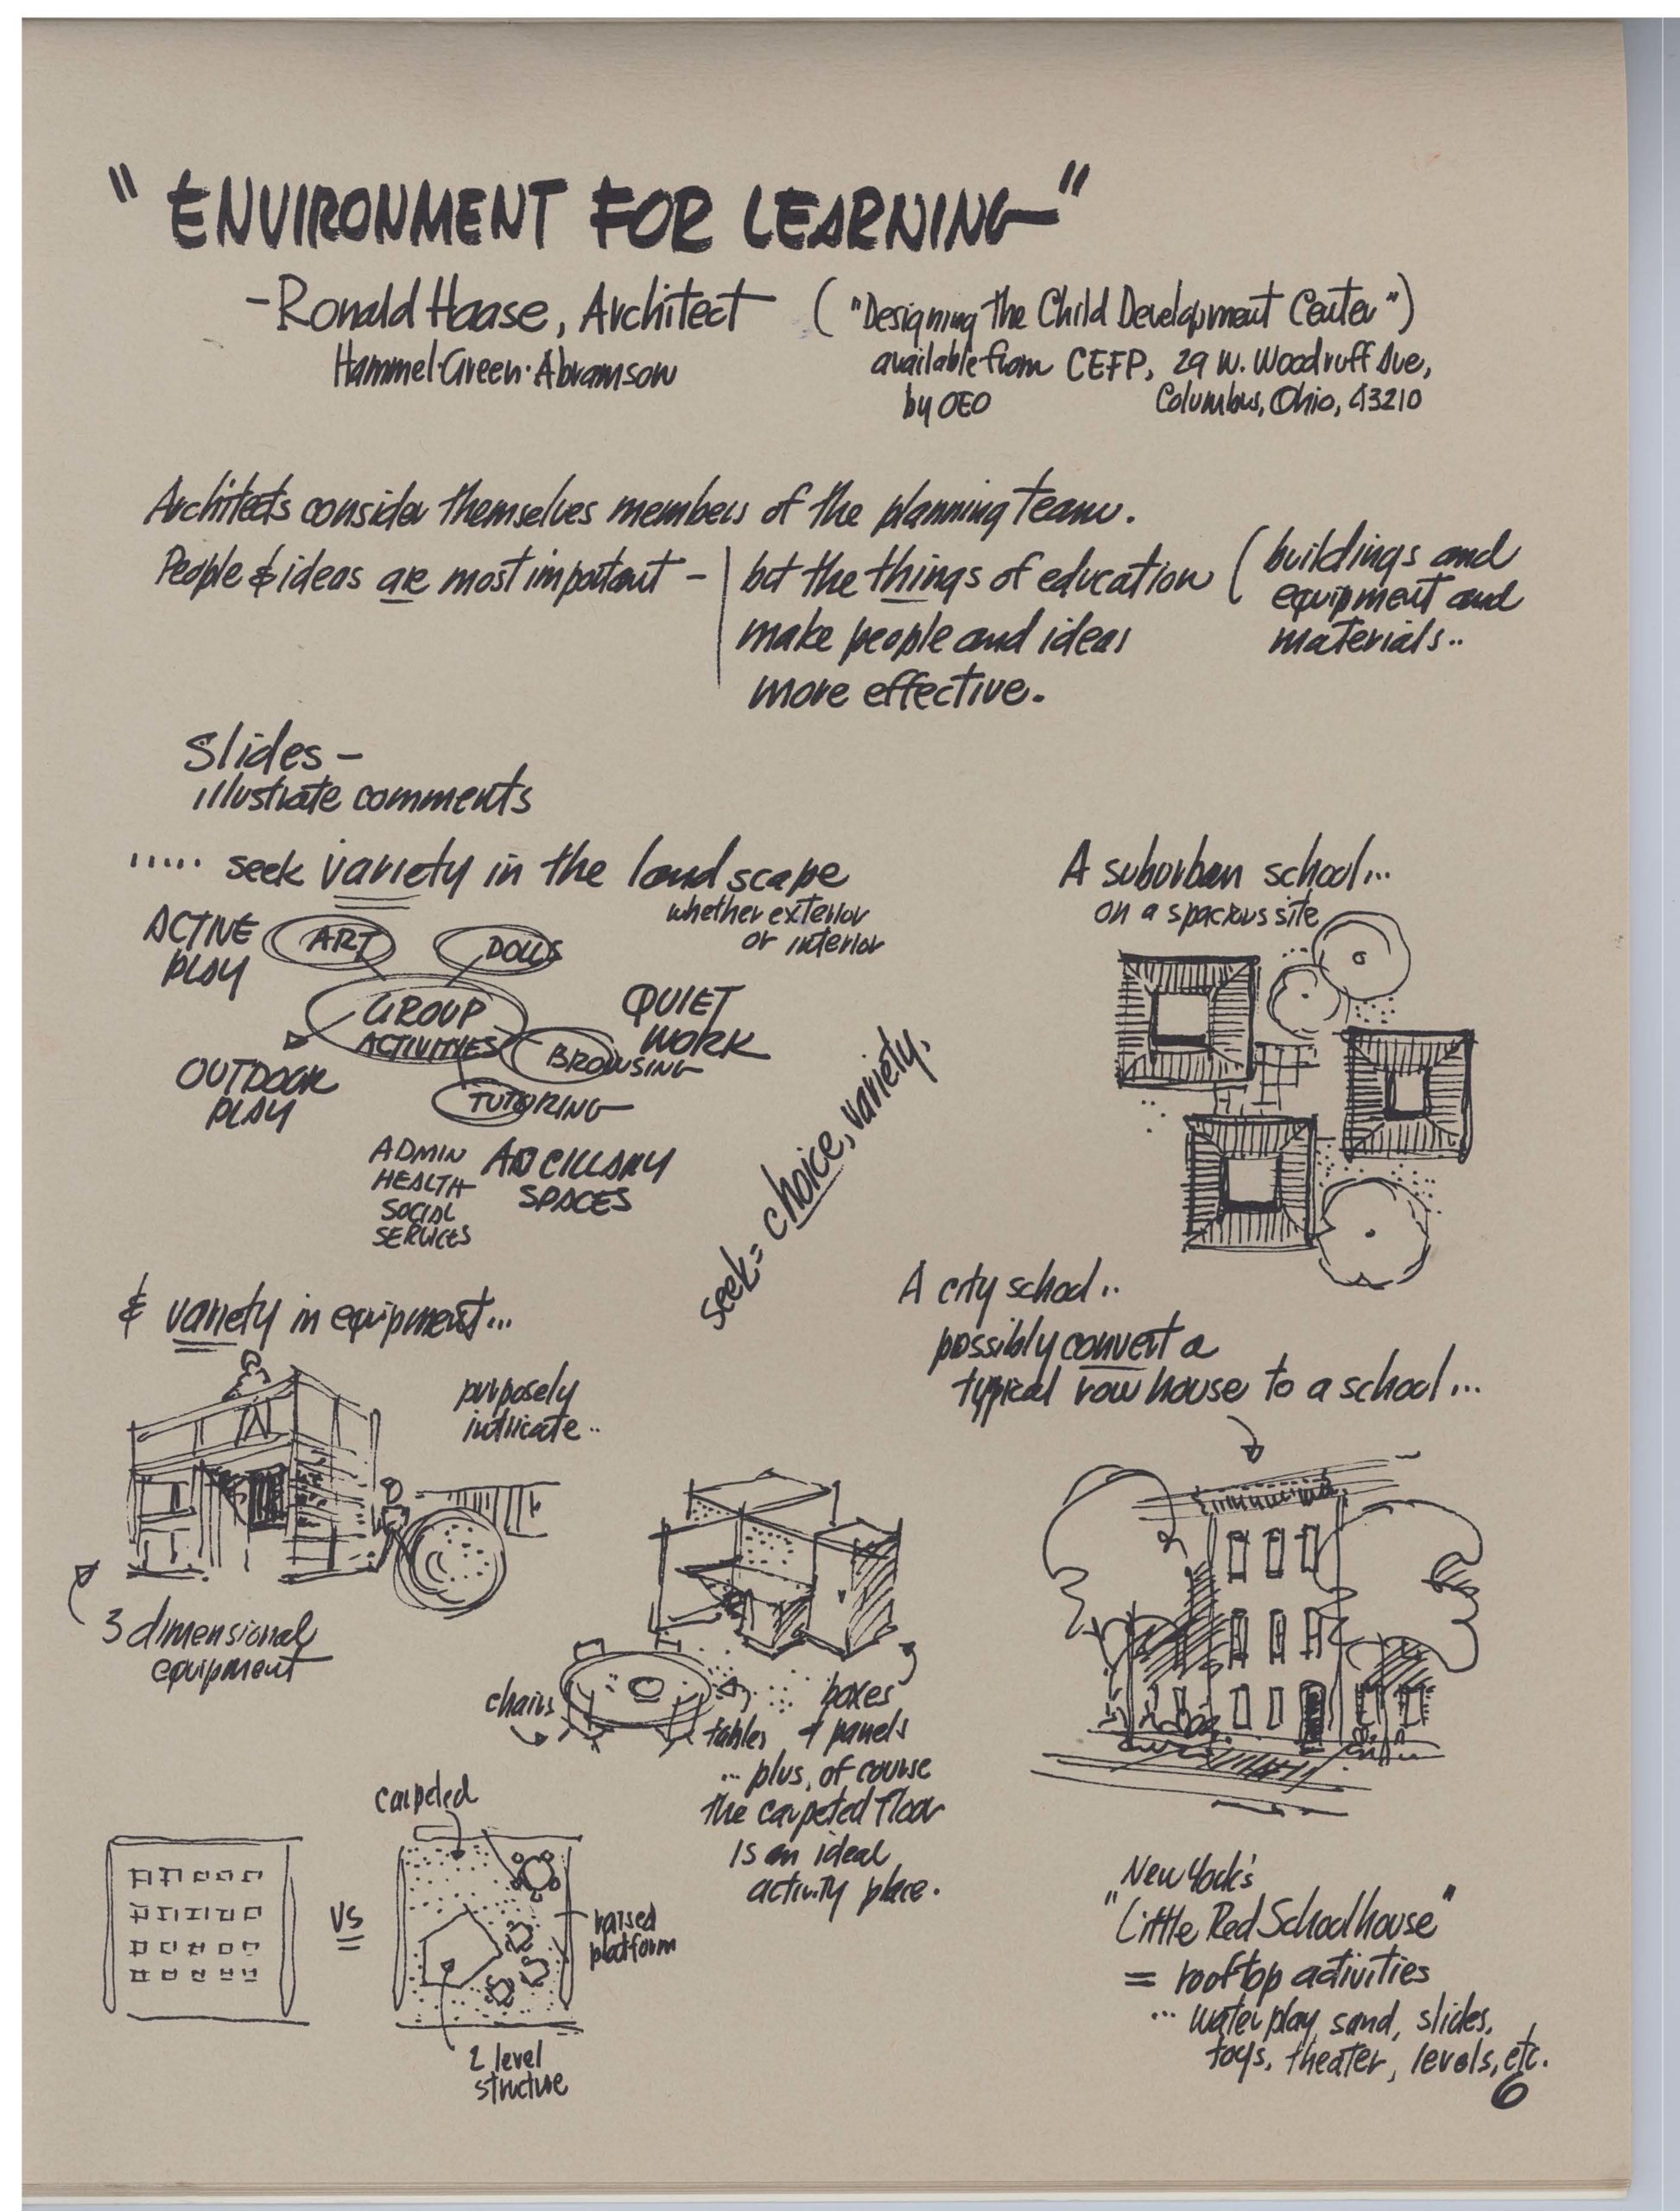 Planning and Development of Facilities for PrePrimary Education_Brubaker Conference Summary Sketchbook 1969_Page_07